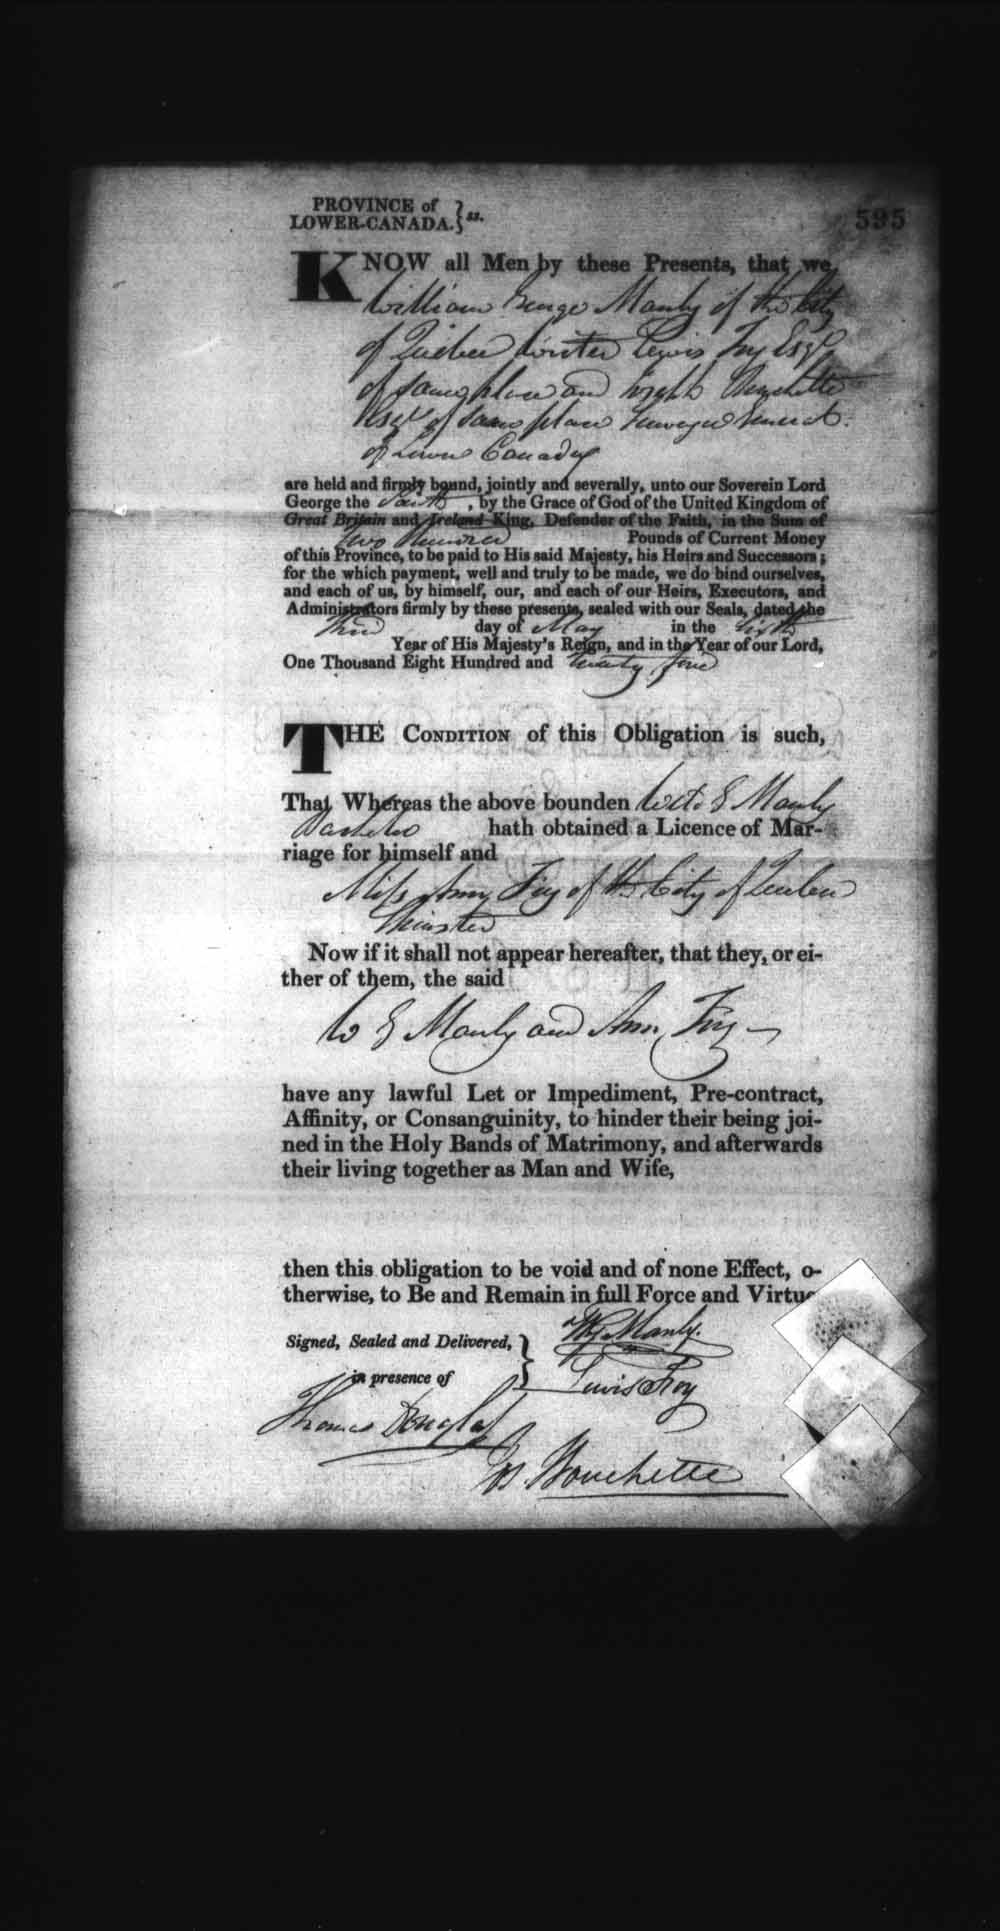 Digitized page of Upper and Lower Canada Marriage Bonds (1779-1865) for Image No.: e008236602